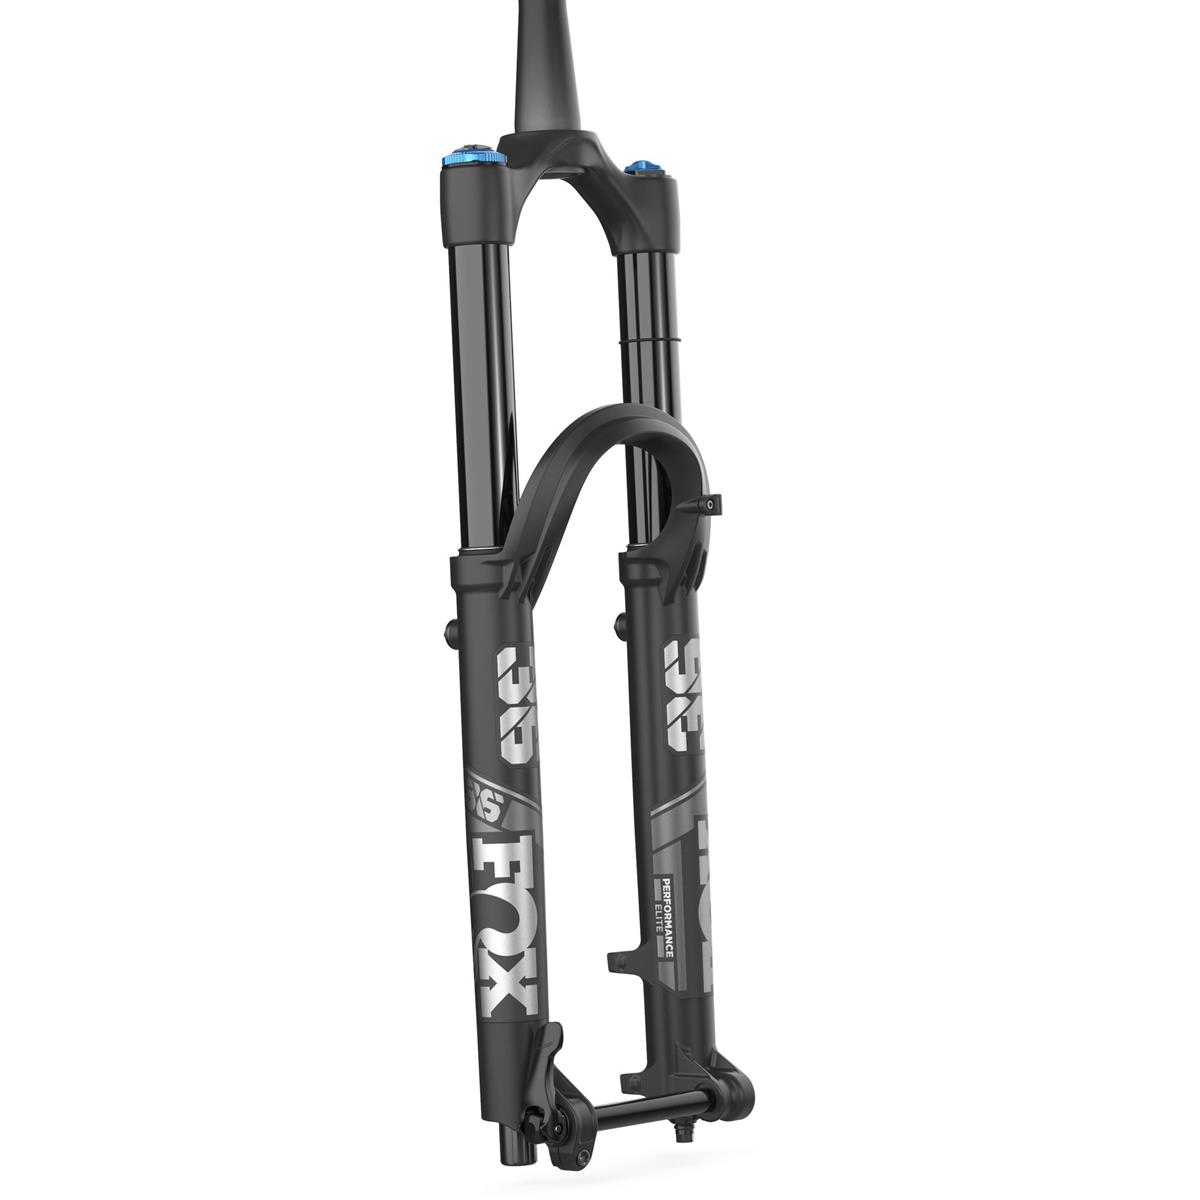 Fox Racing Shox Suspension Fork 36 Float Performance Elite 29 Inches, 15x110 mm, GRIP 2, 44 mm Offset, 160 mm